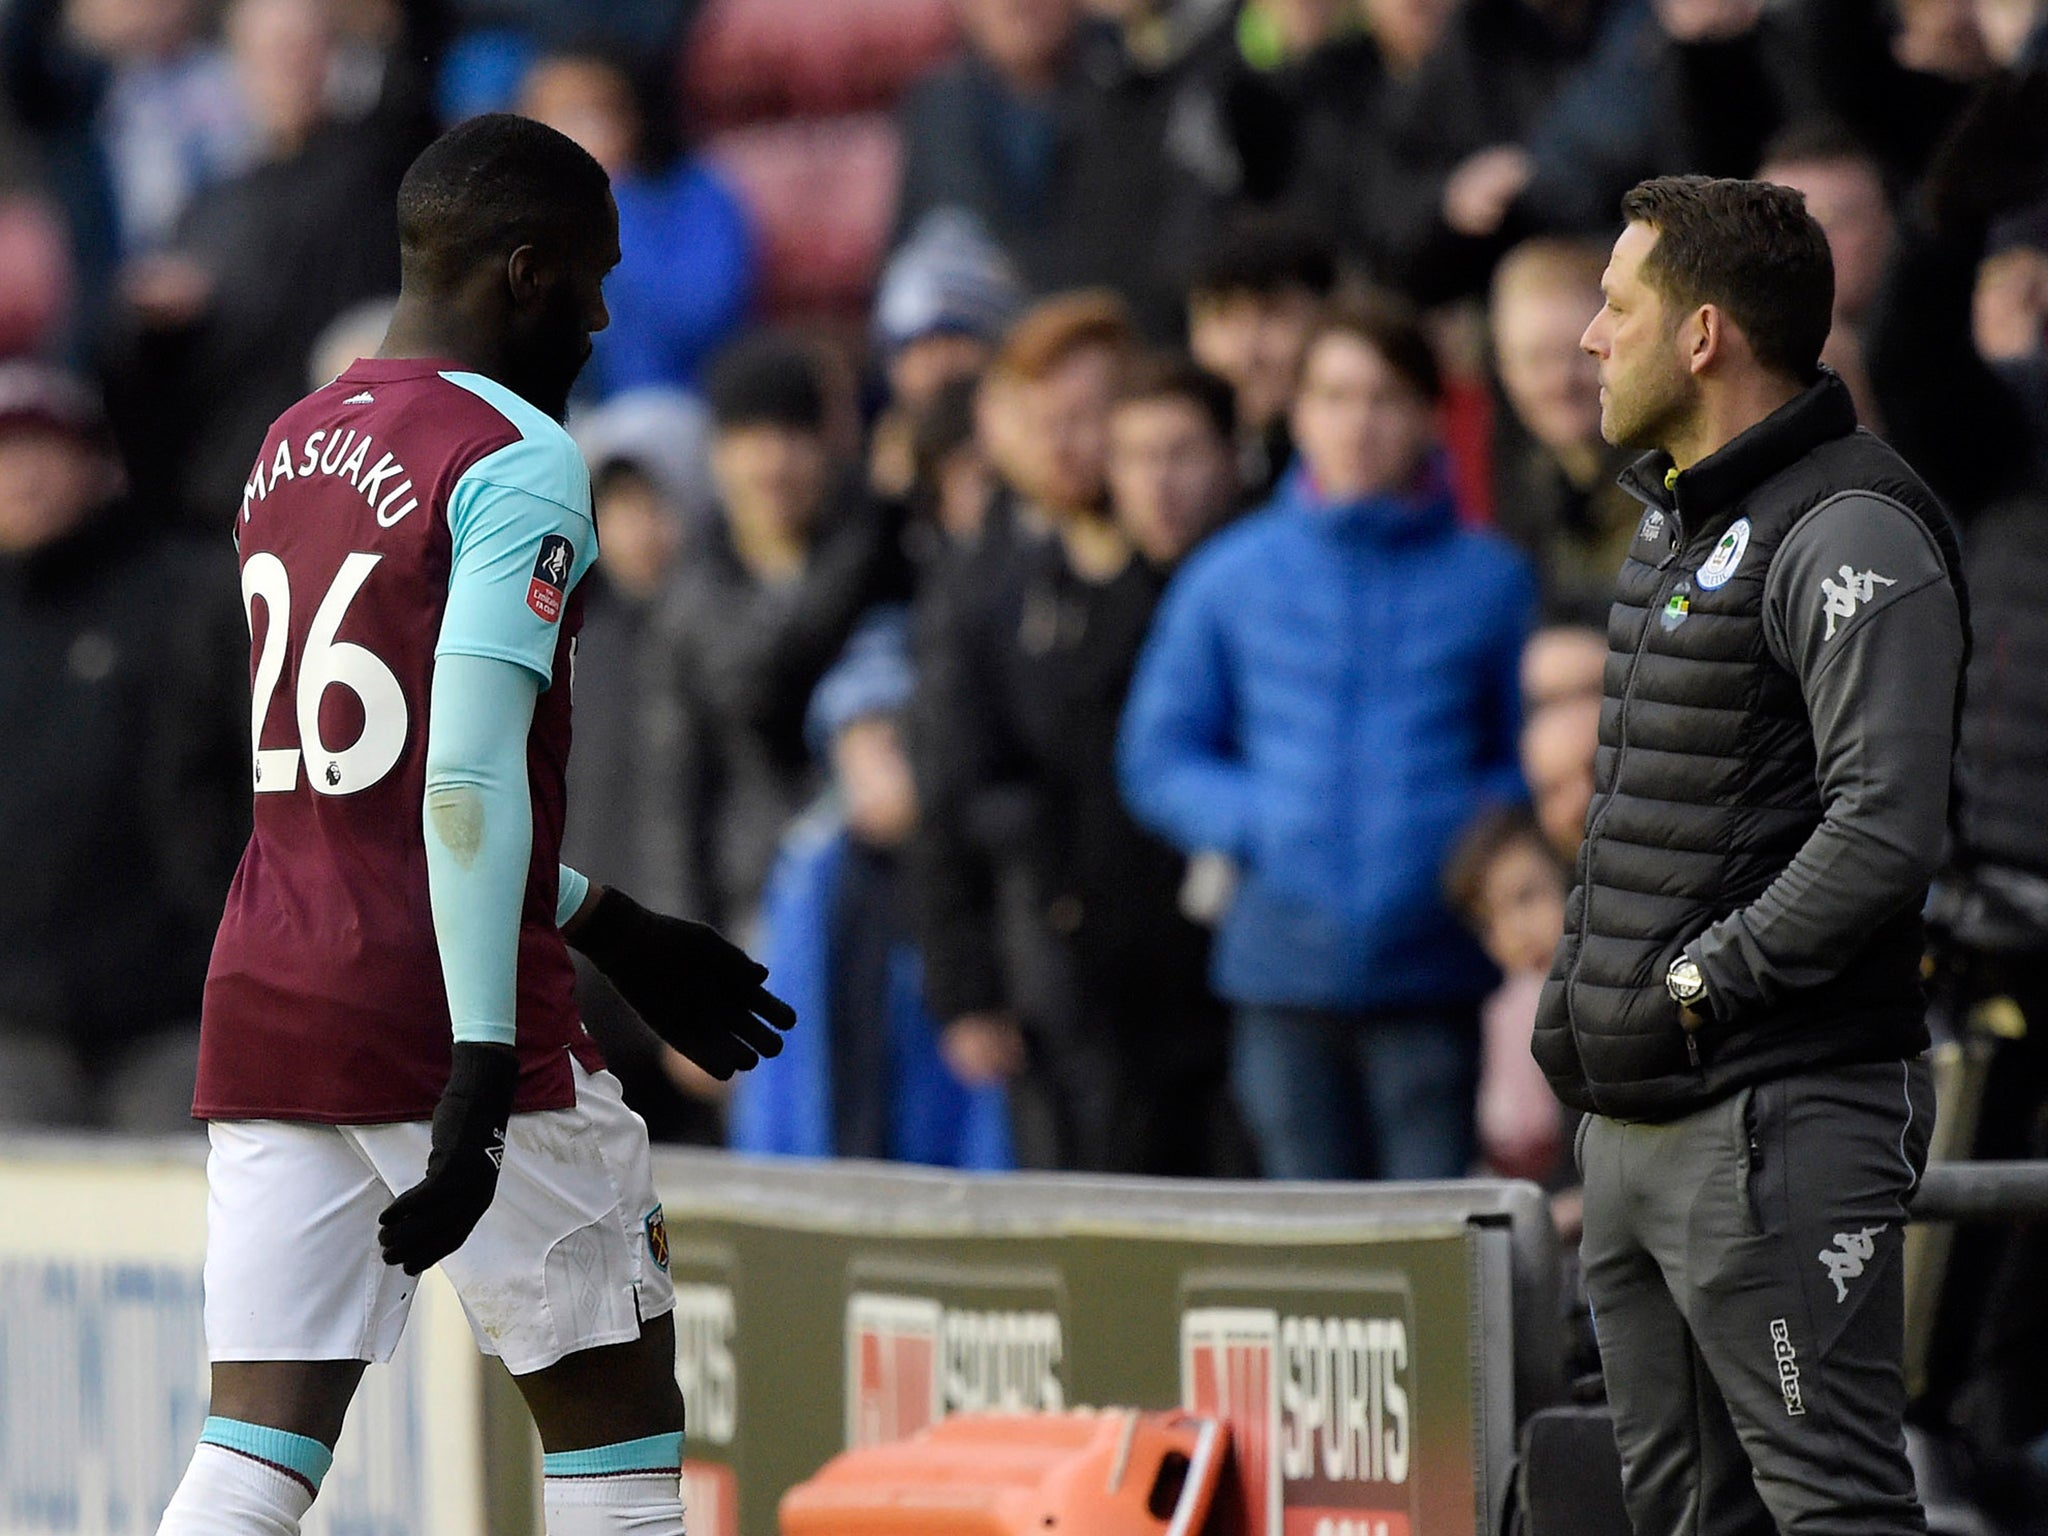 Arthur Masuaku is facing disciplinary action after being sent off for spitting during West Ham's defeat by Wigan